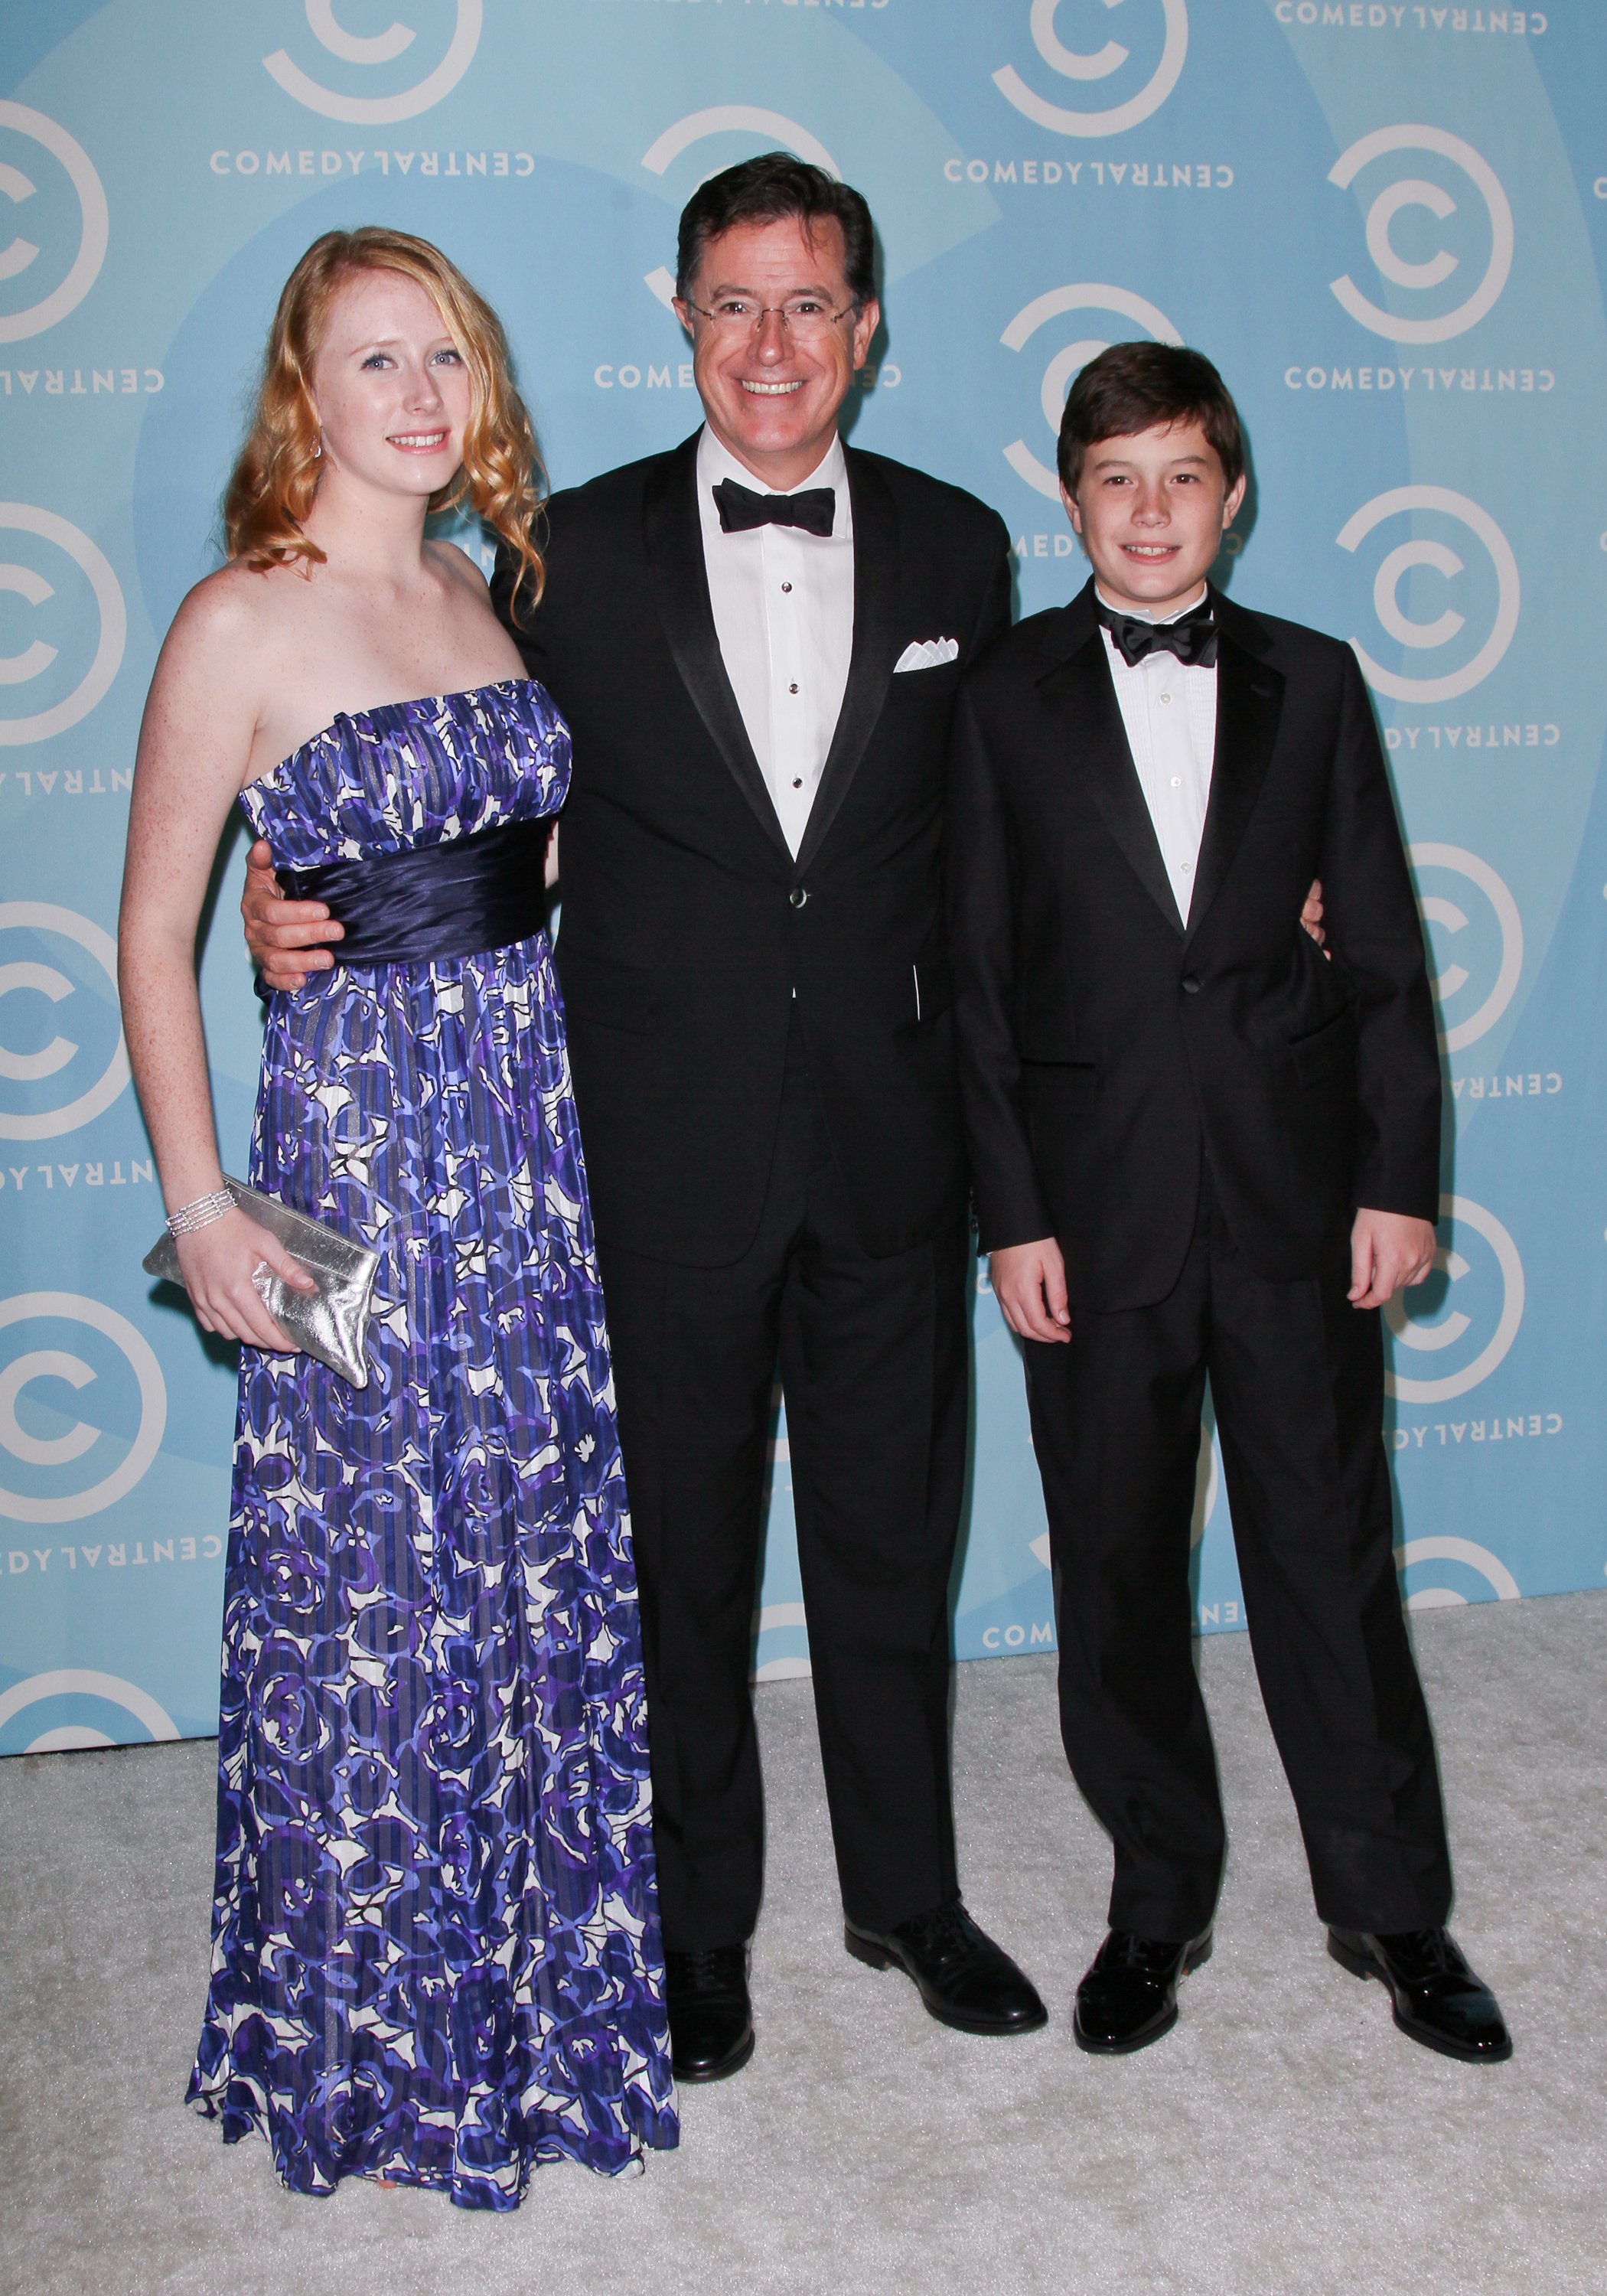 Madeline Colbert, Stephen Colbert, and John Colbert at the 2011 Primetime Emmy Awards Comedy Central after party on September 18, 2011 | Source: Getty Images